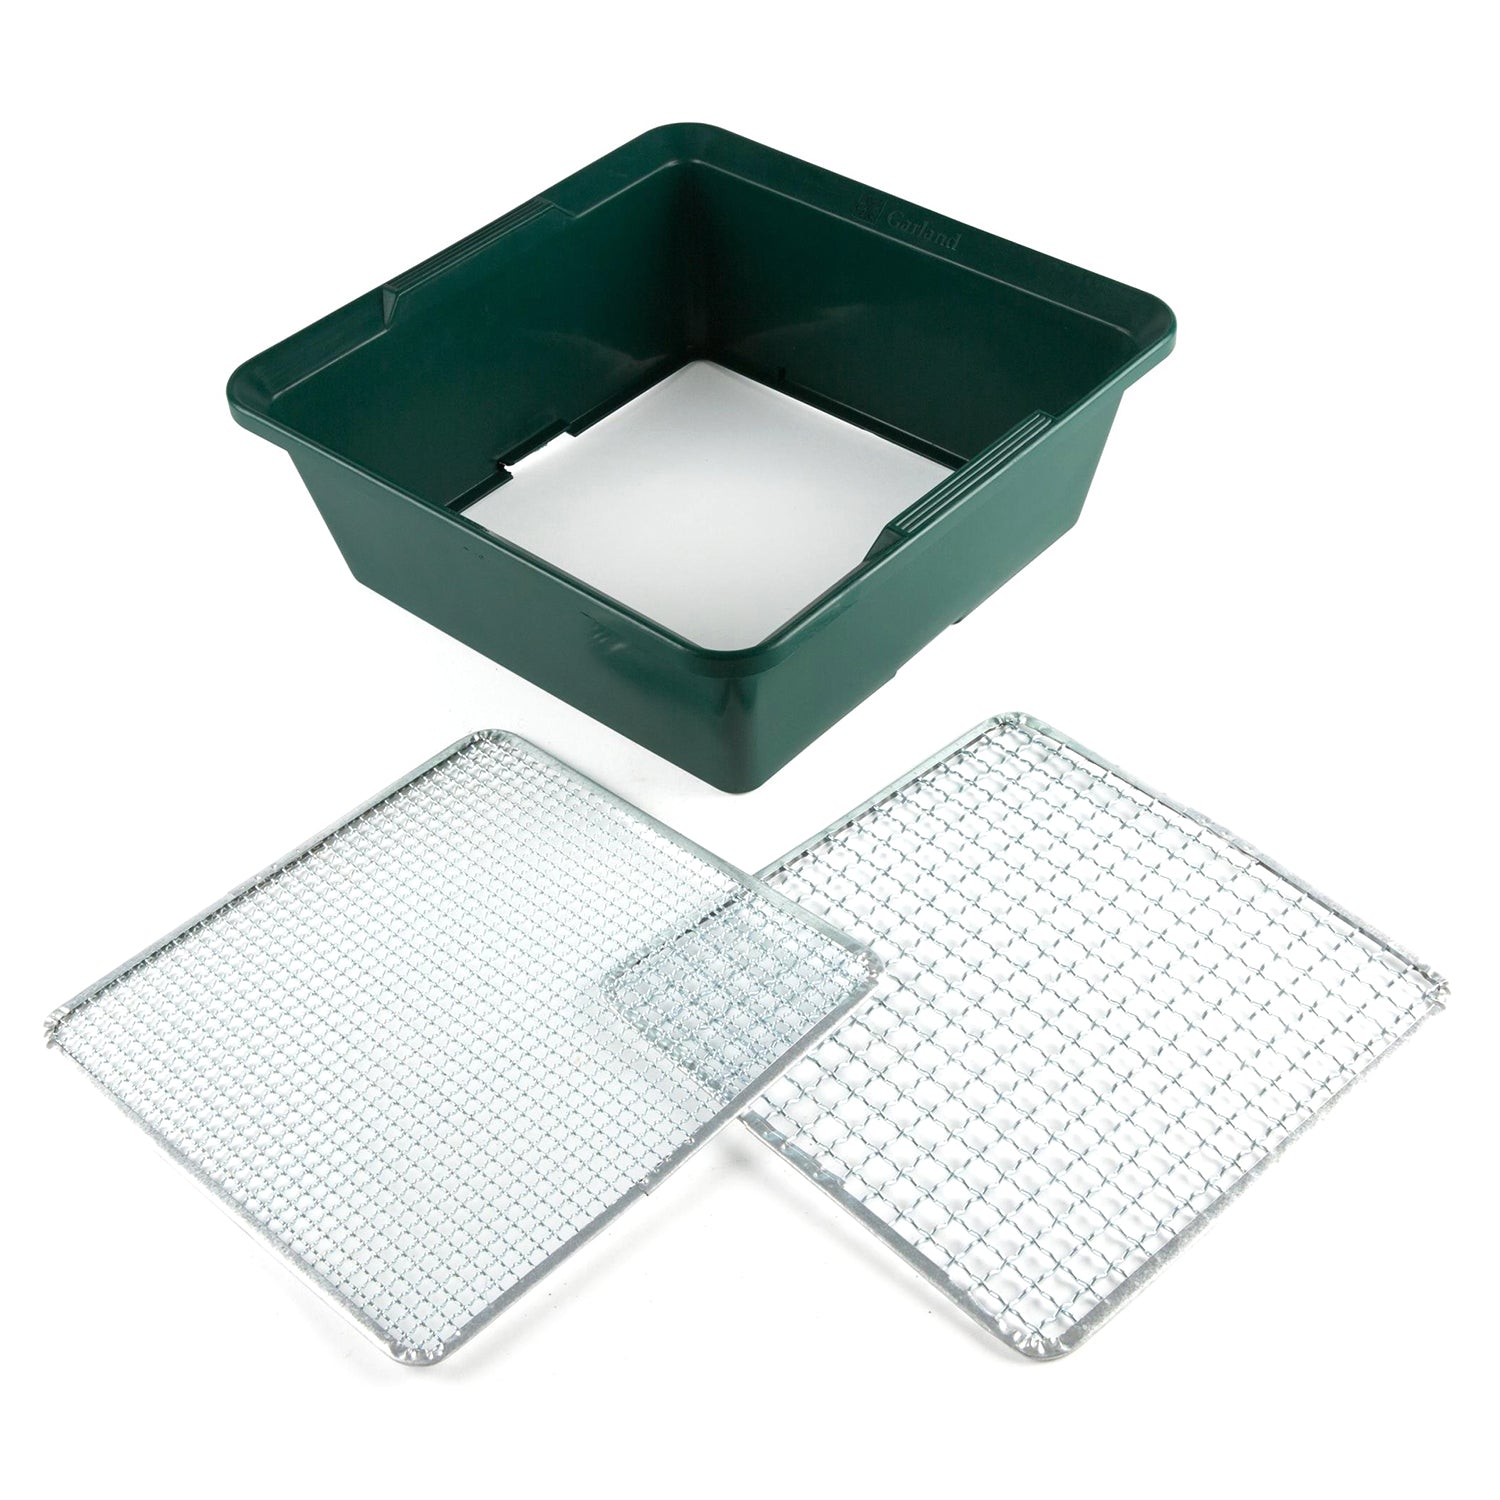 2 in 1 Sieve. 13.8" Square x 5"D, 1.5lbs.